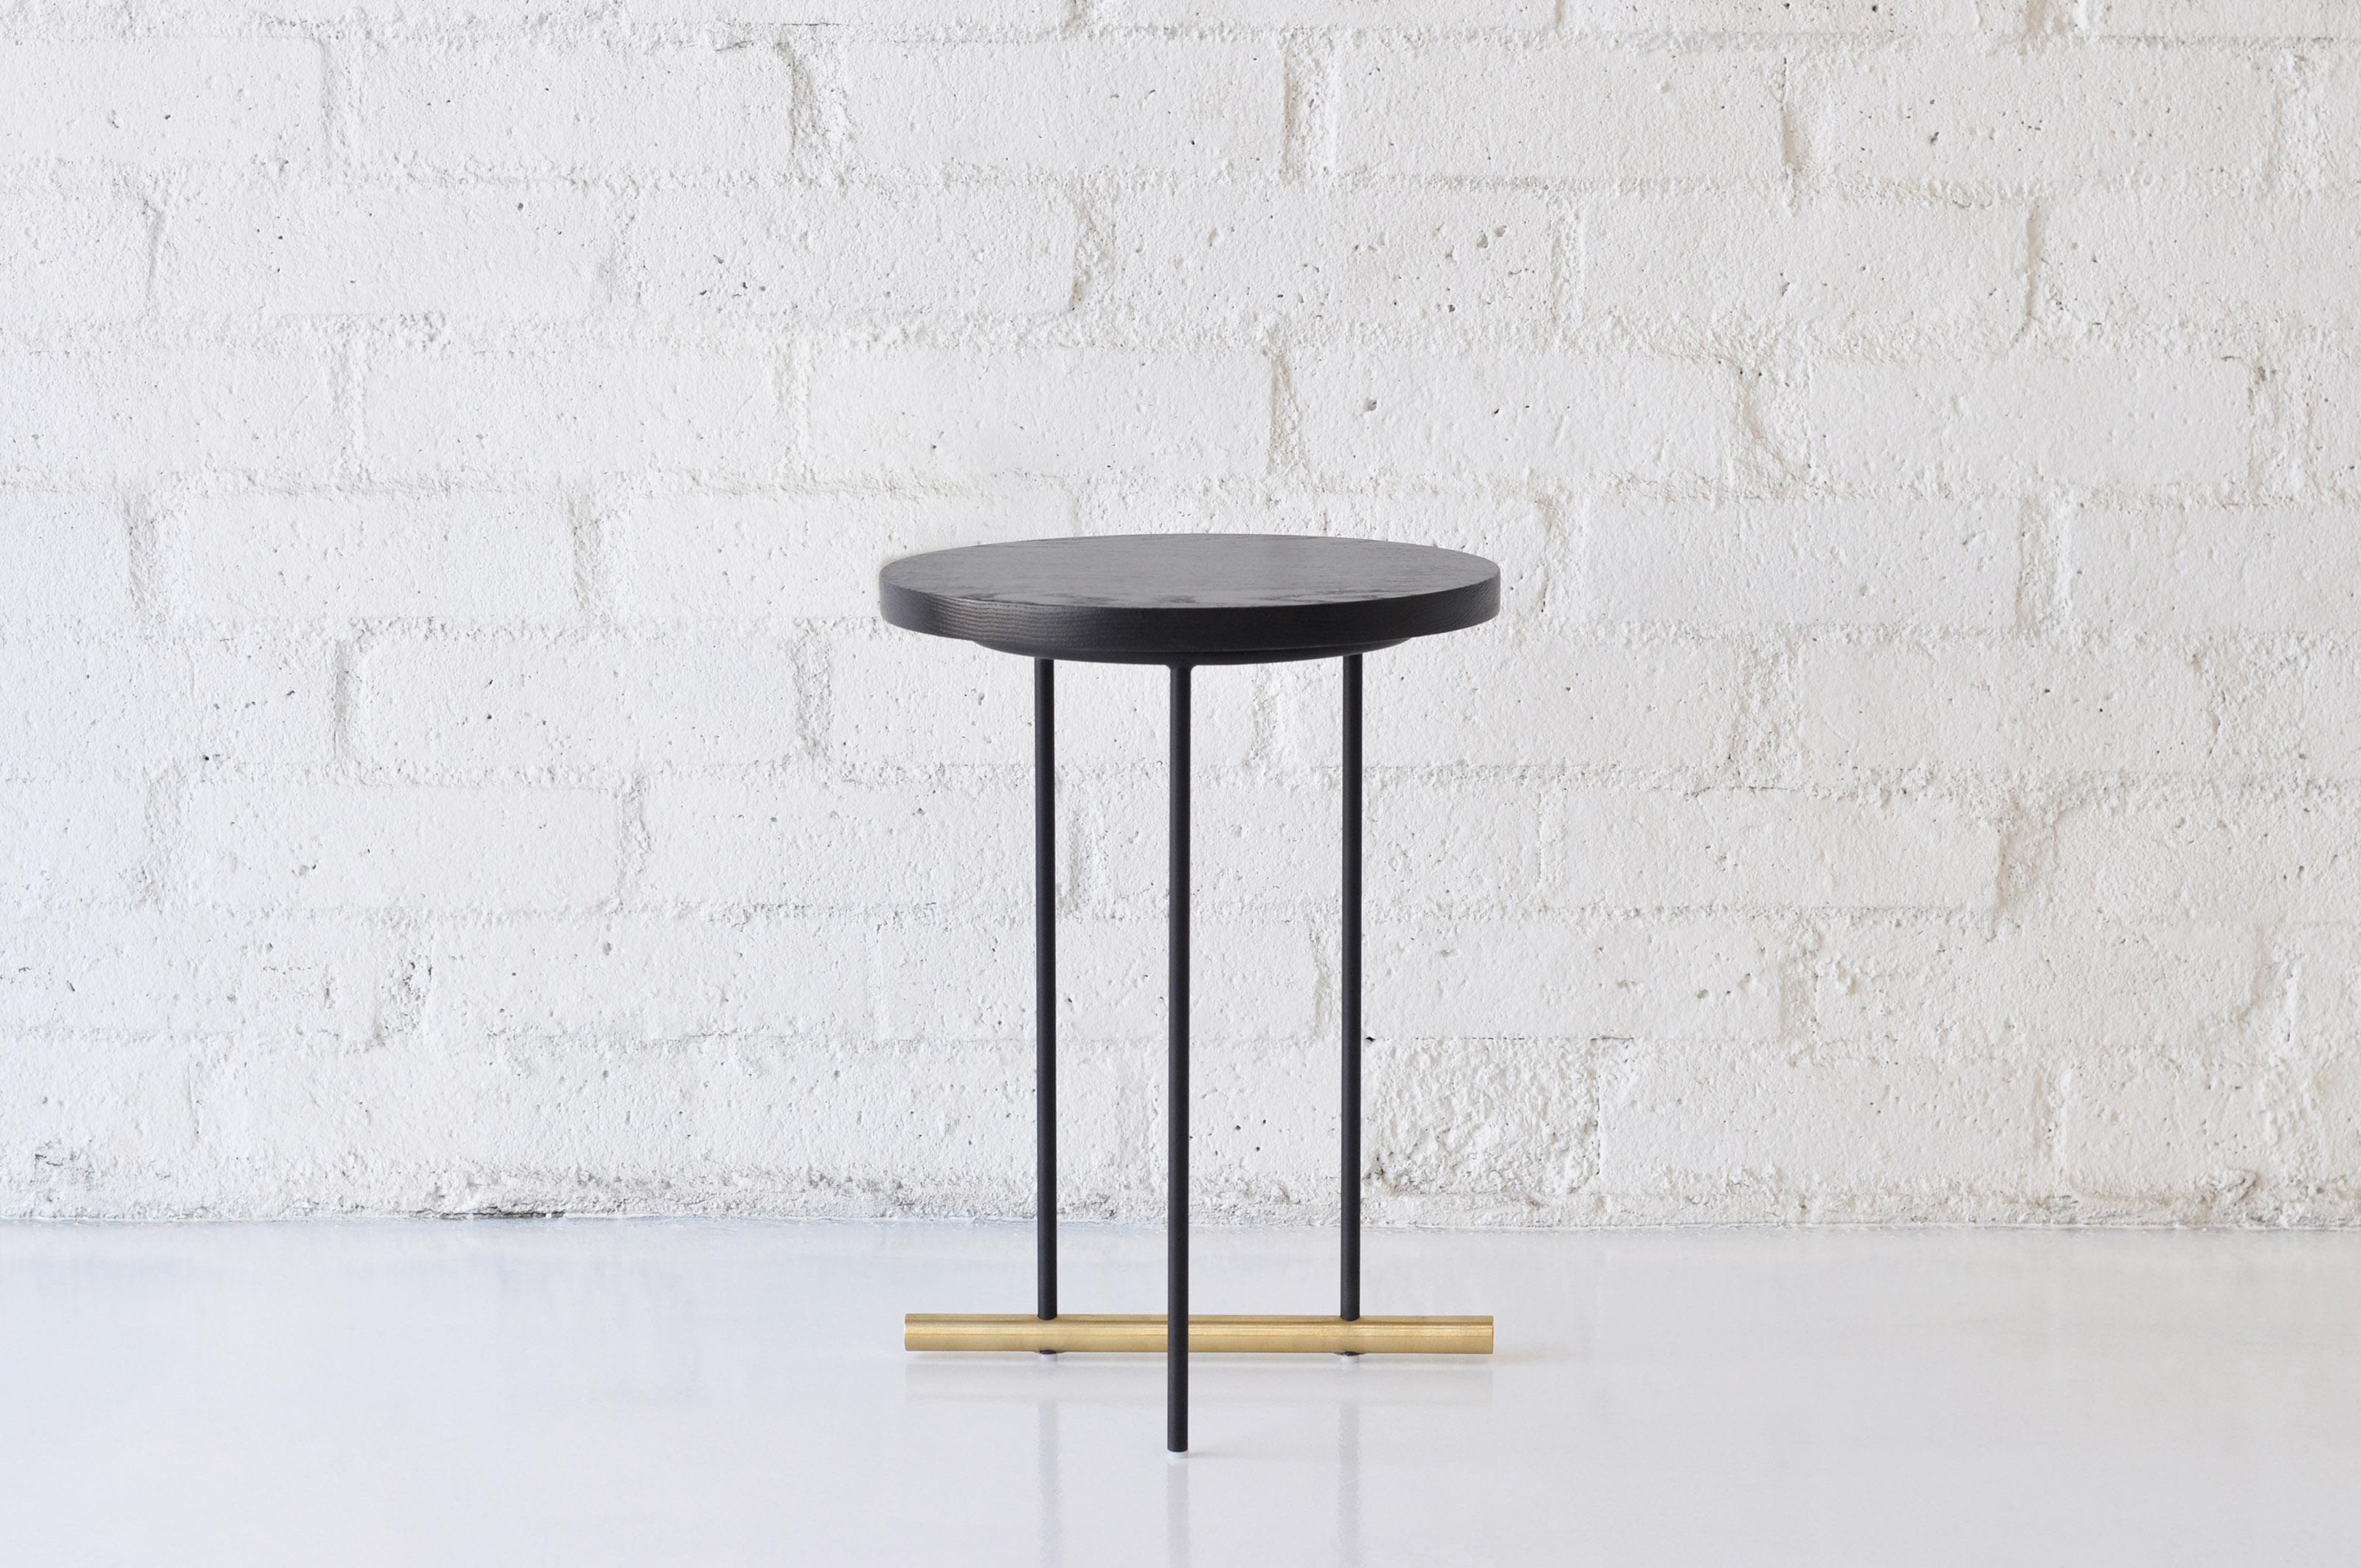 Icon Small Ebonized Oak Side Table by Phase Design
Dimensions: Ø 38,1 x H 51.5 cm. 
Materials: Ebonized oak, powder-coated metal and brushed brass.

Solid steel and brass with glass, marble, or solid wooden tops. Steel bar available in a flat black